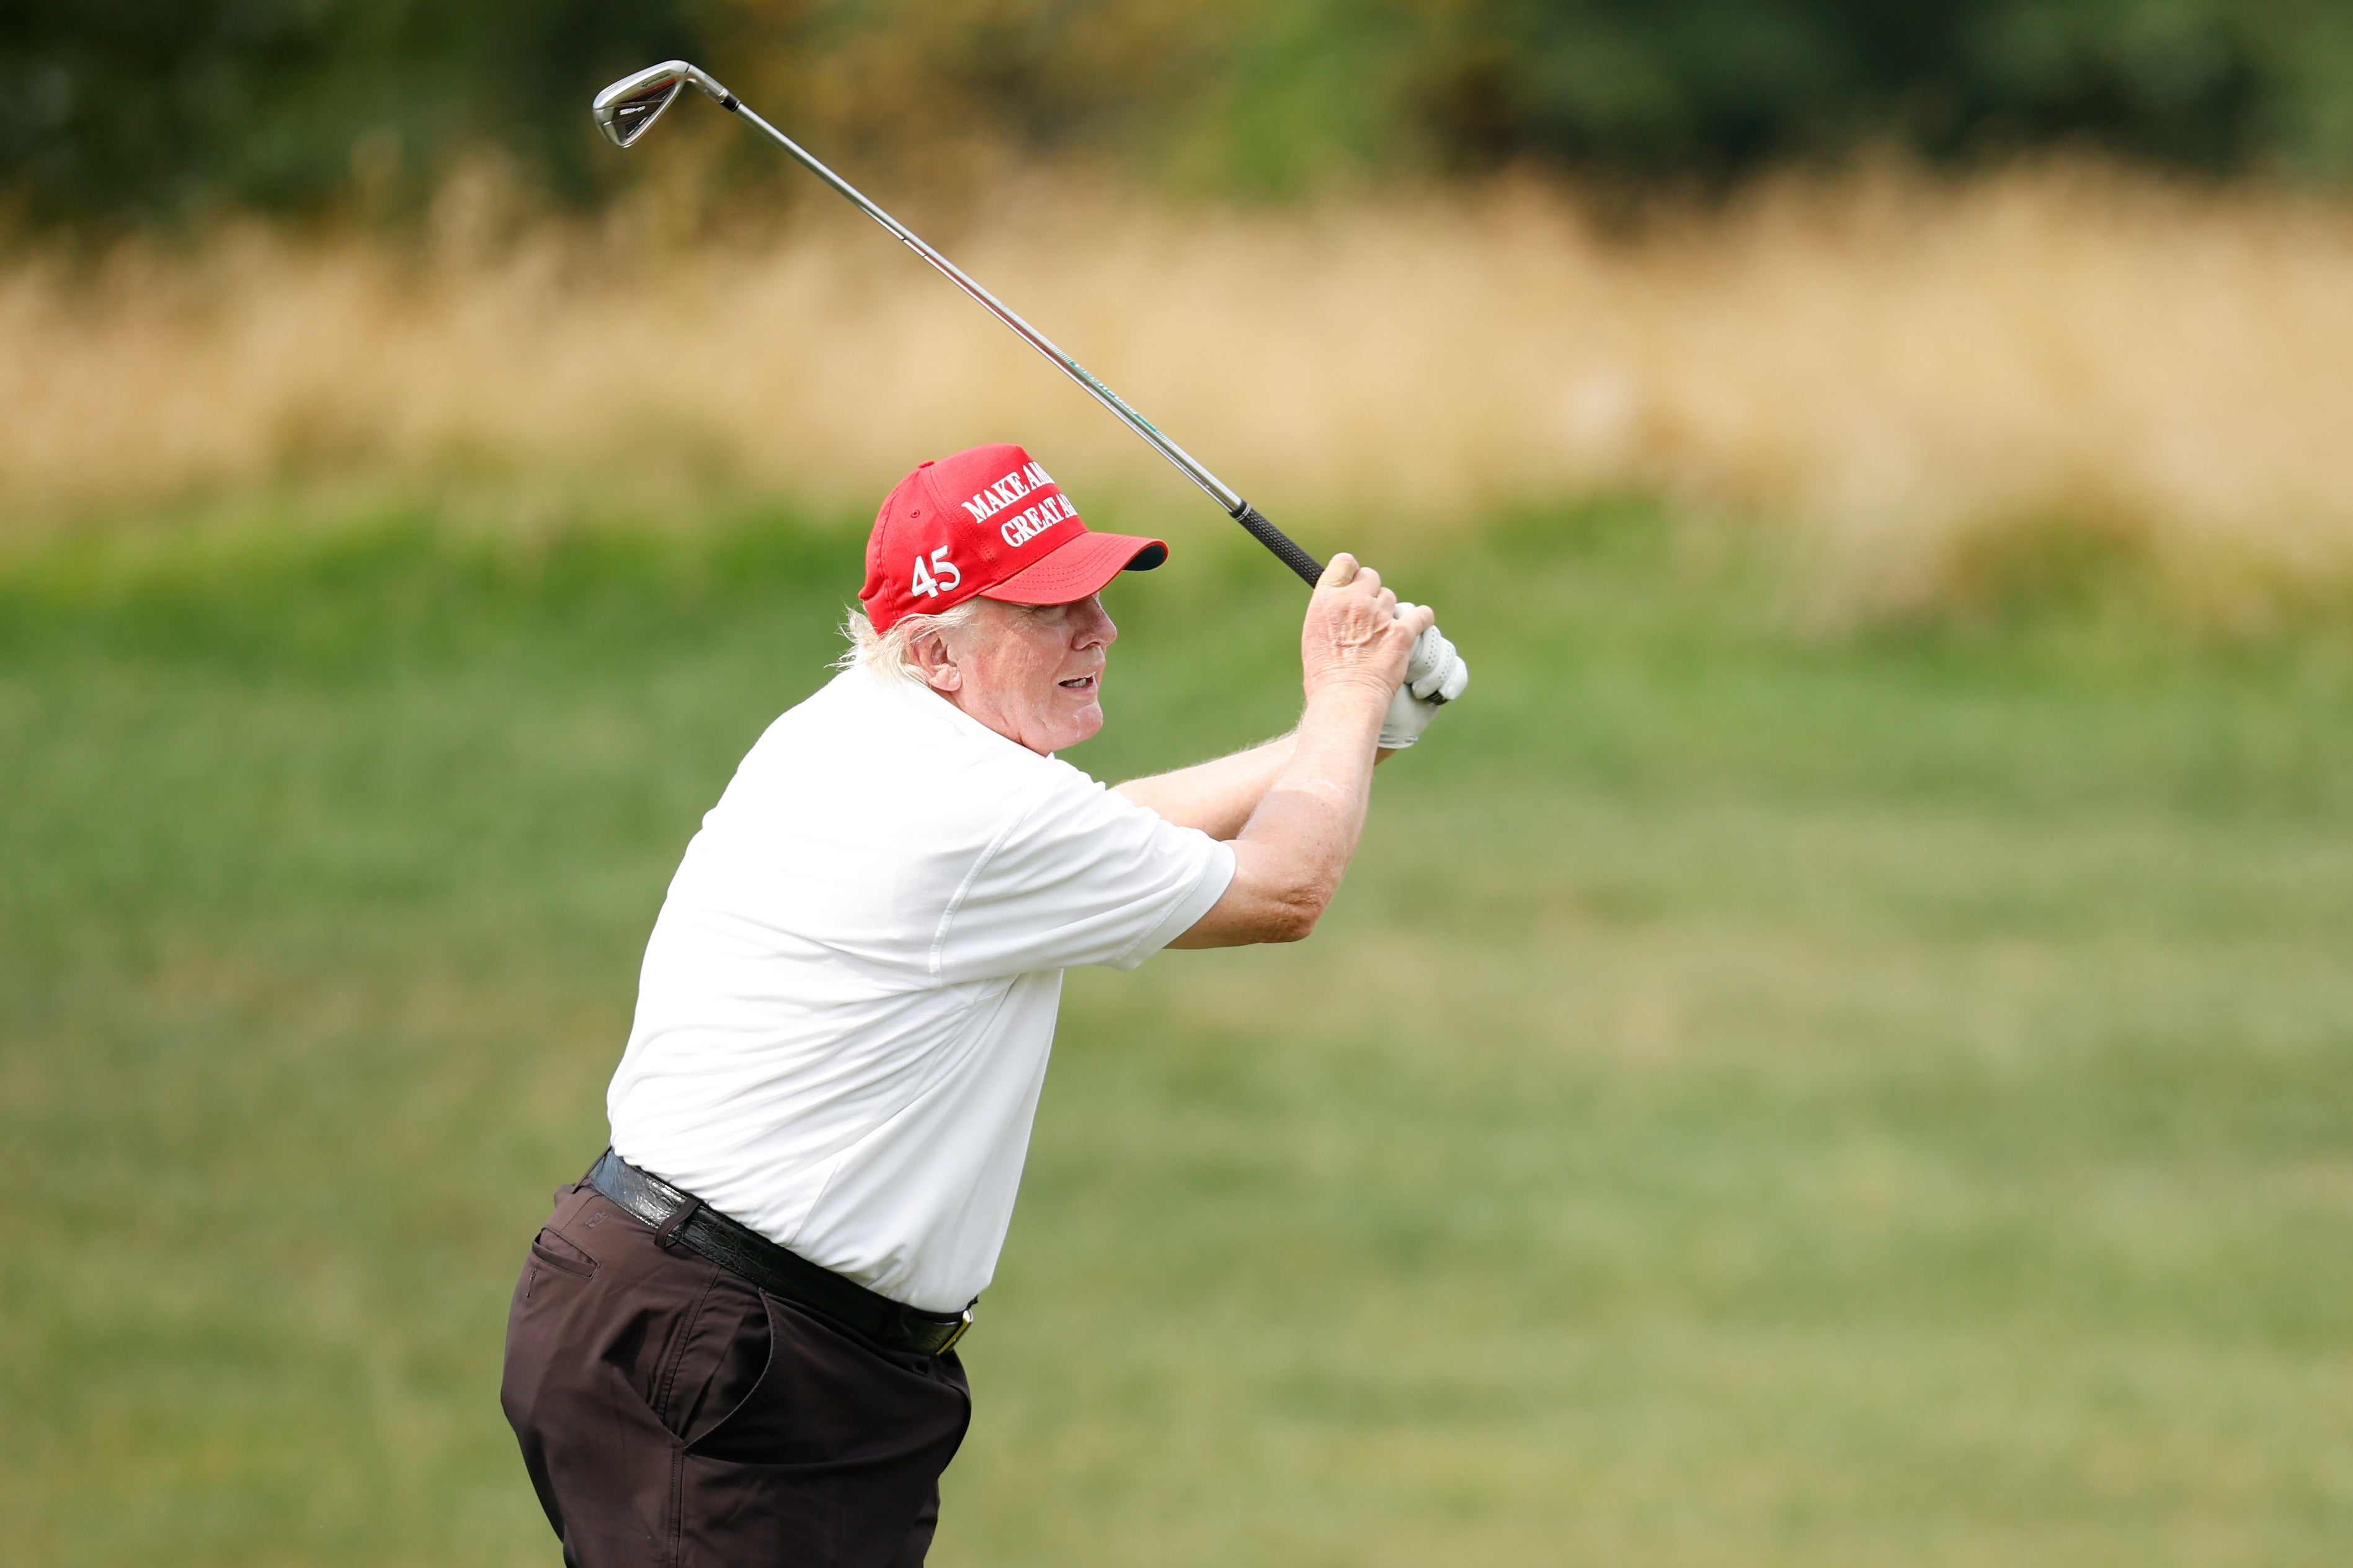 Trump boasted in 2015 that if he became president he’d have no time for golf – but ended up playing more than 300 times once elected